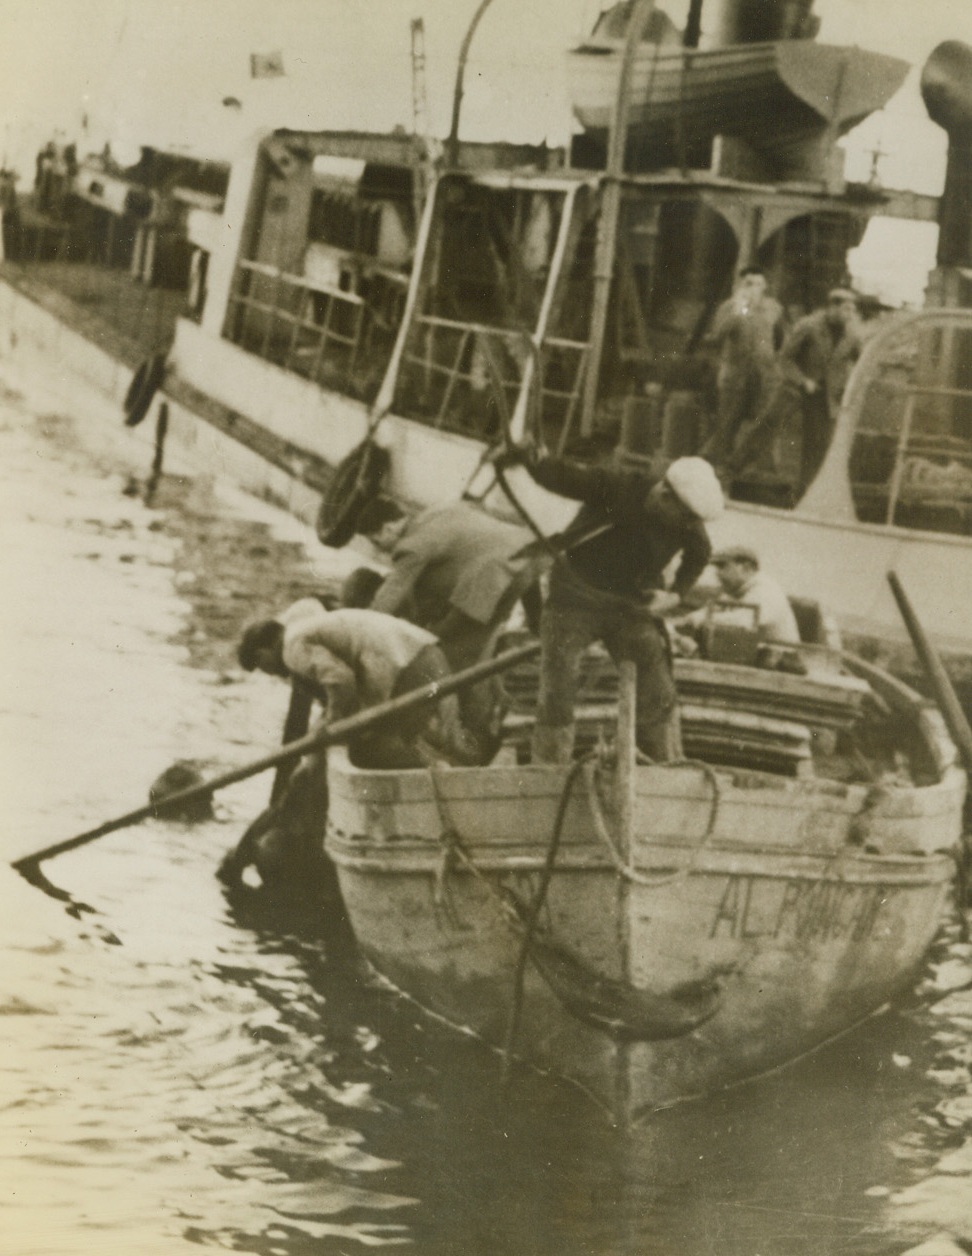 Rescued from Sunken Tank, 12/26/1942. Algiers—When U.S. General Grant tanks were being unloaded at Algiers, one fell into the water. Two of the crew swam ashore, but the third went down to the rescue and this photo shows him bringing the crewmen up.Credit: ACME.;